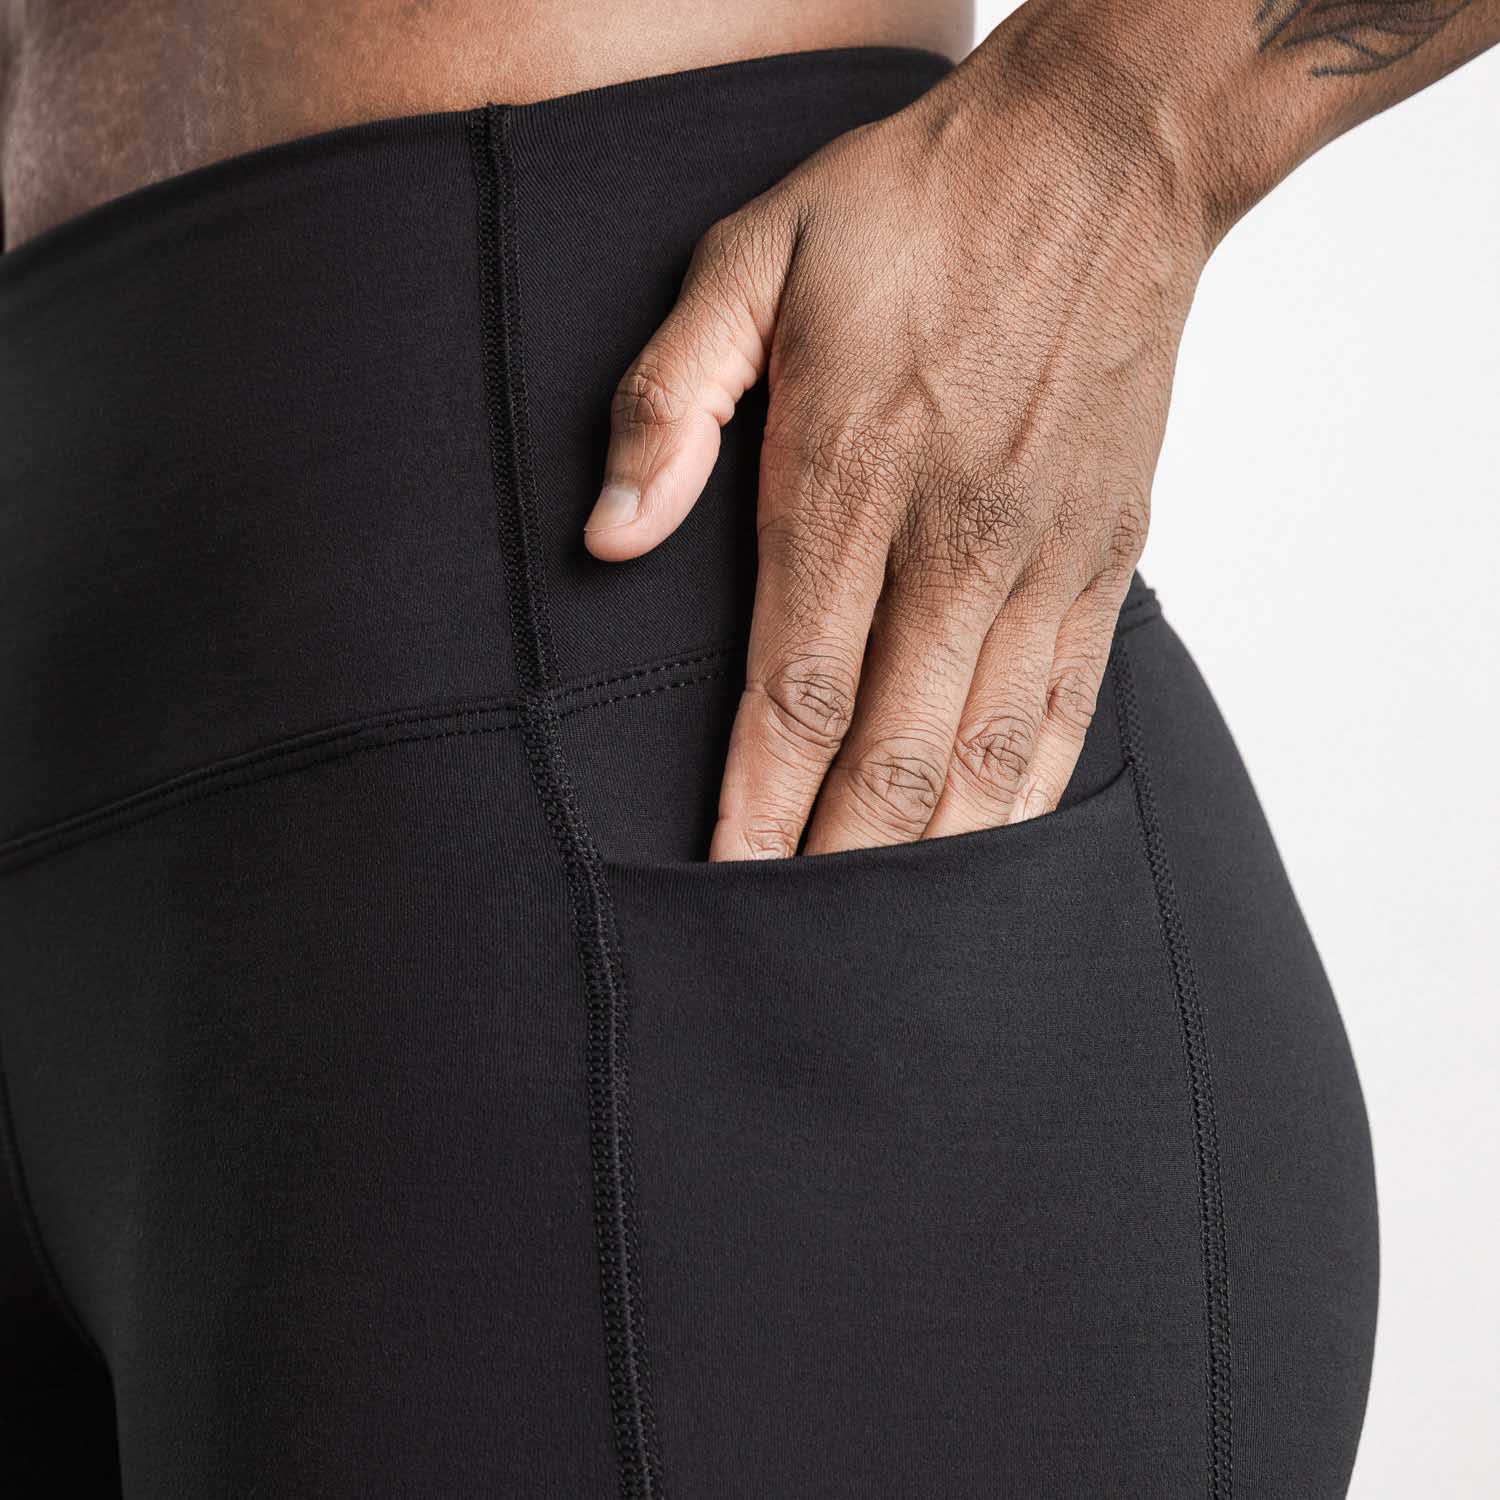 lululemon athletica Fast And Free High-rise Tight Leggings Pockets